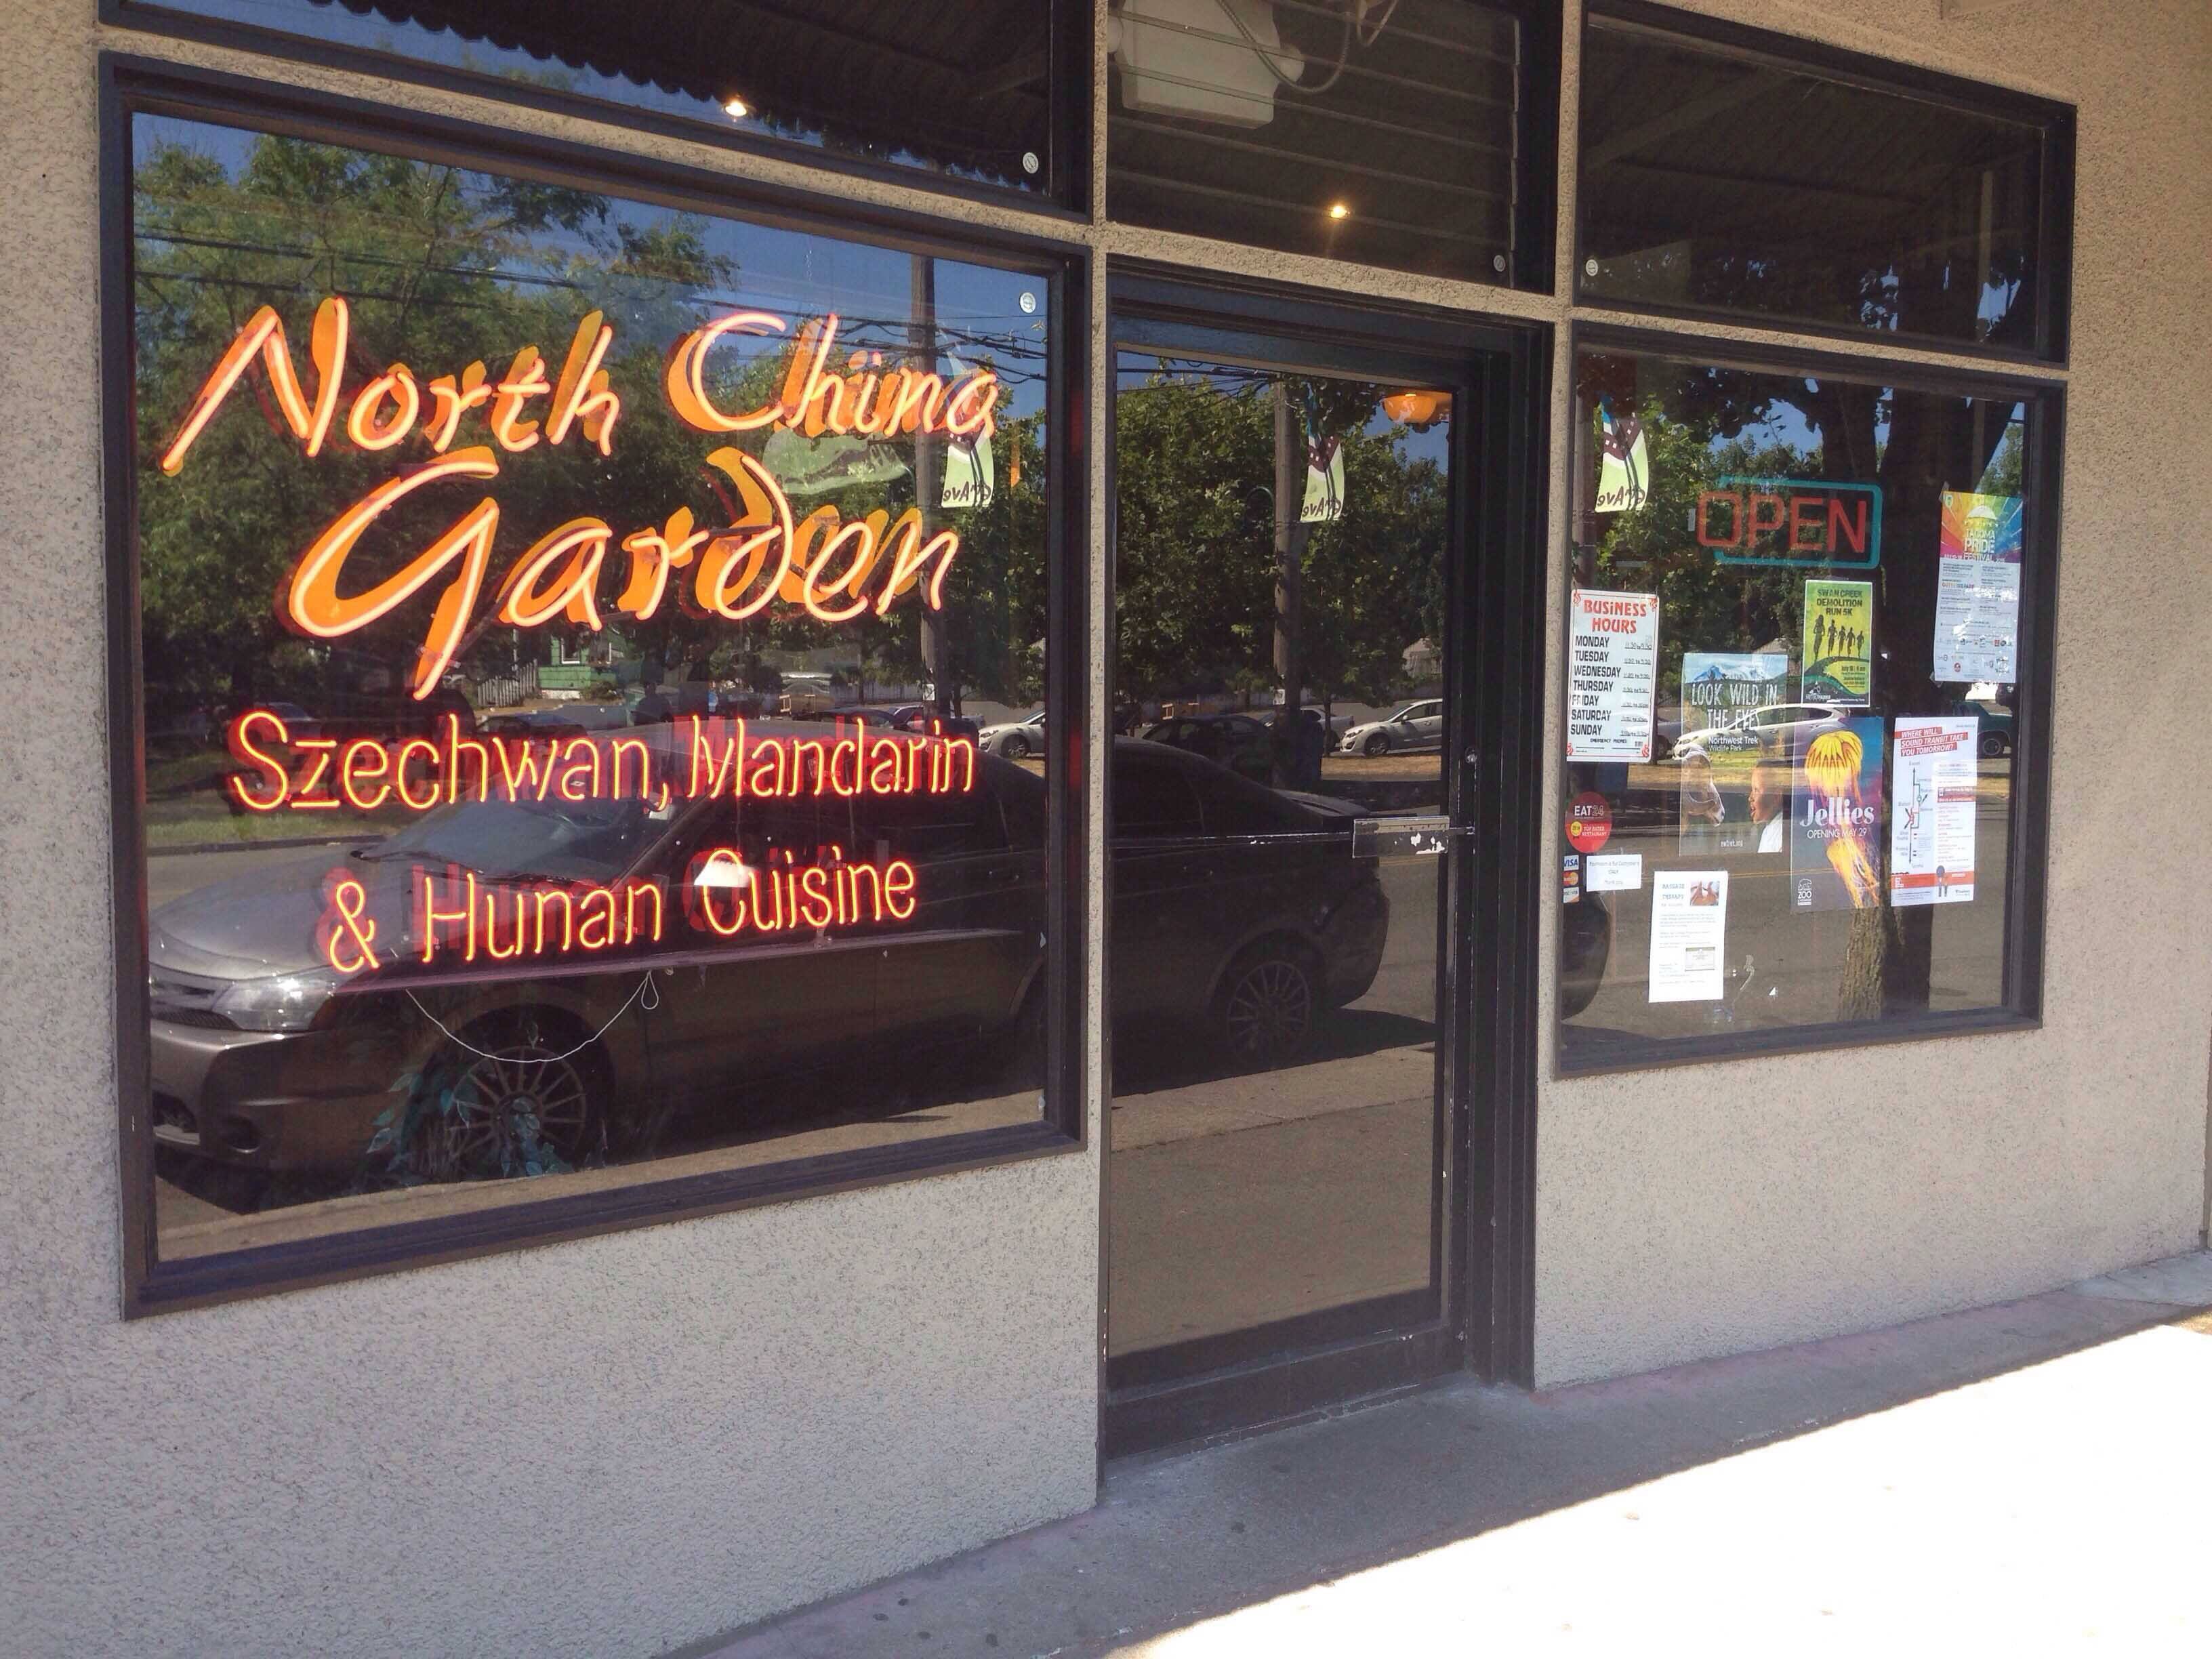 North China Garden Reviews User Reviews For North China Garden